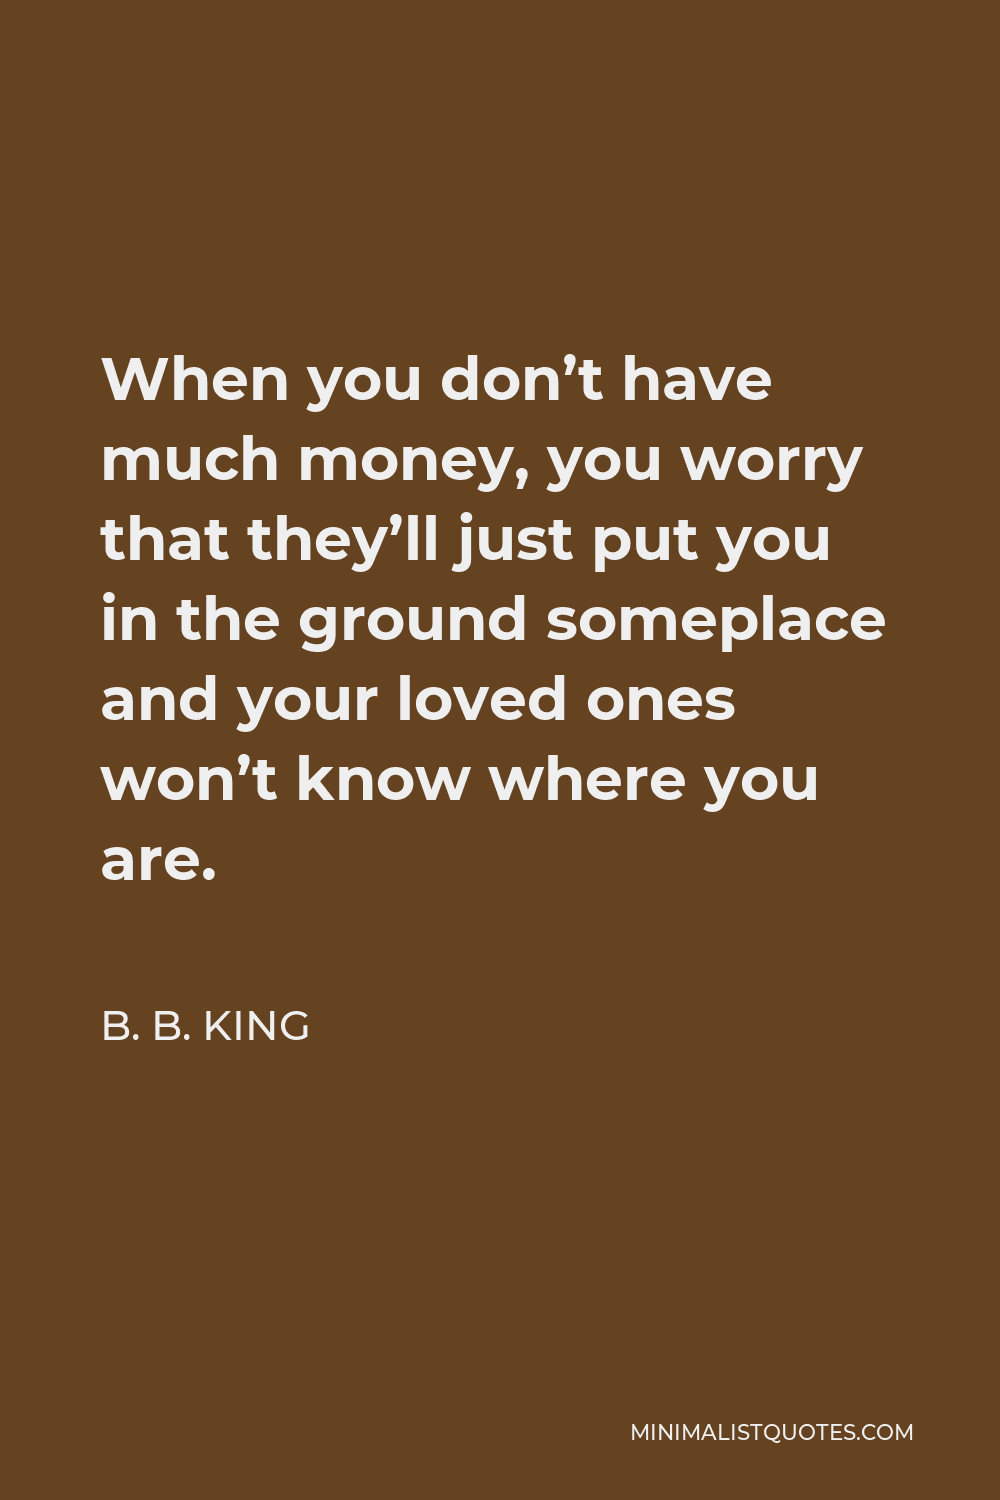 B. B. King Quote - When you don’t have much money, you worry that they’ll just put you in the ground someplace and your loved ones won’t know where you are.